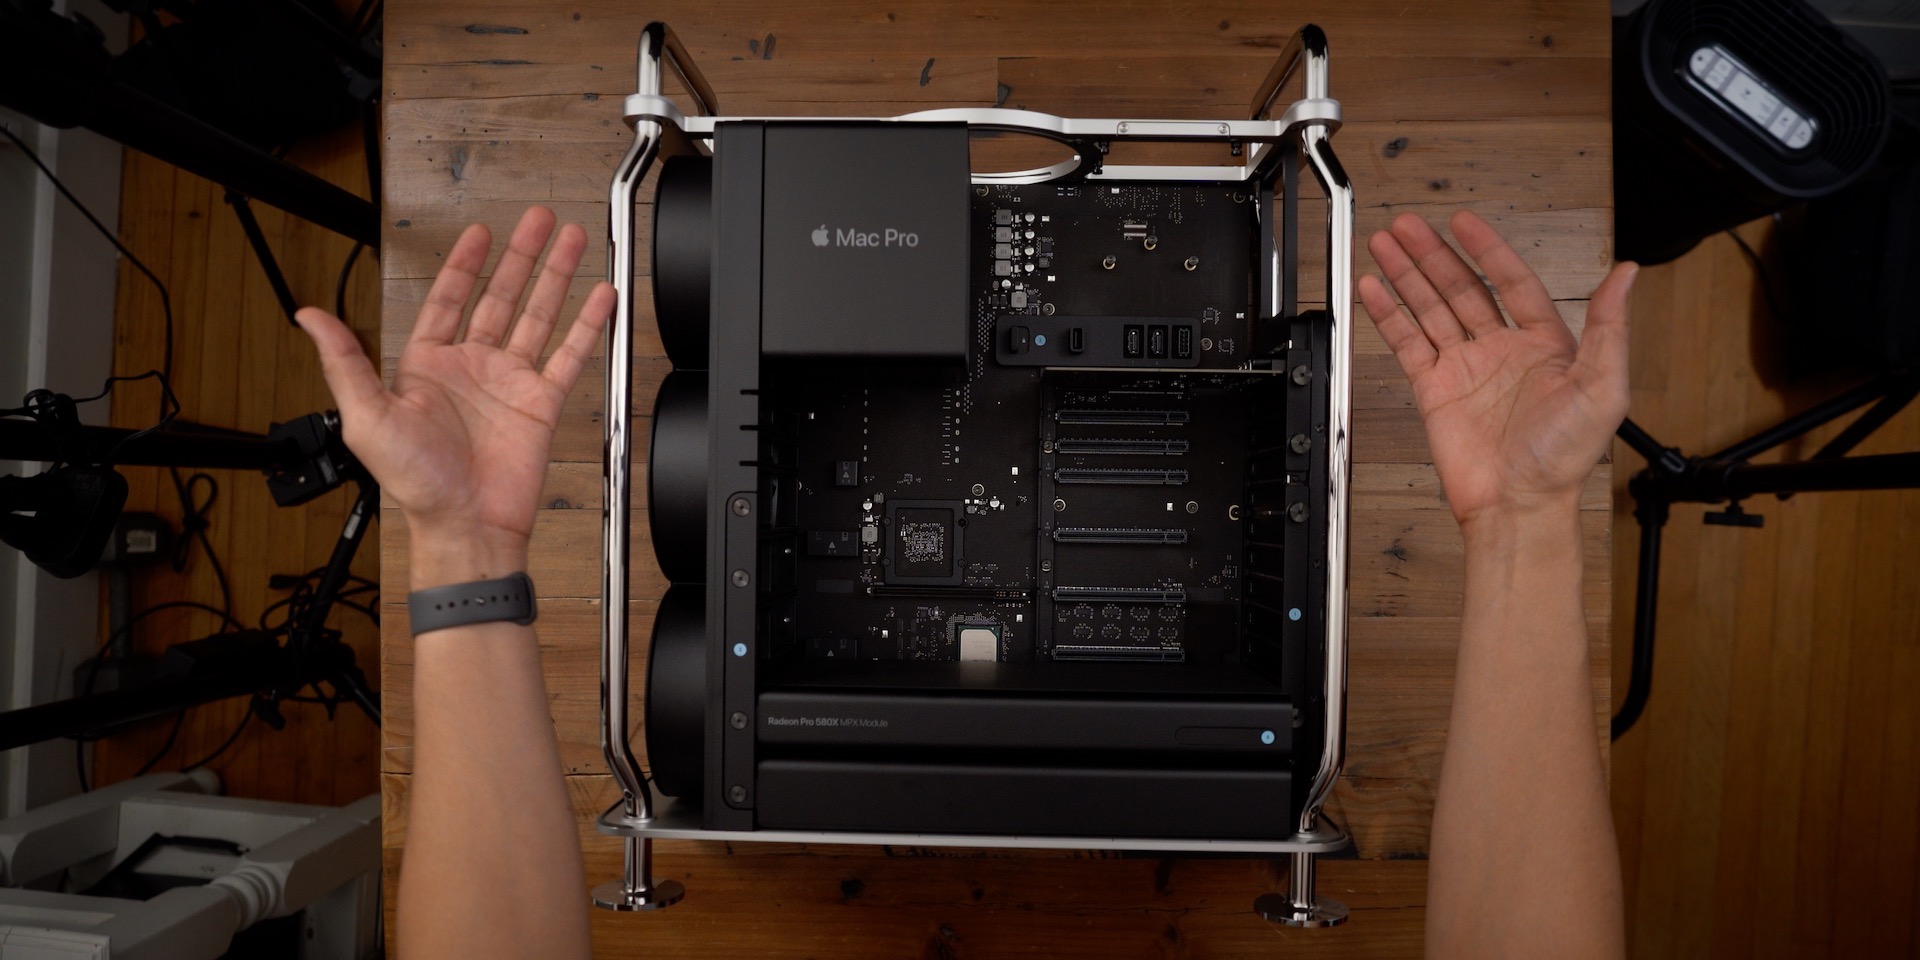 The inside of the 2019 Mac Pro chassis.